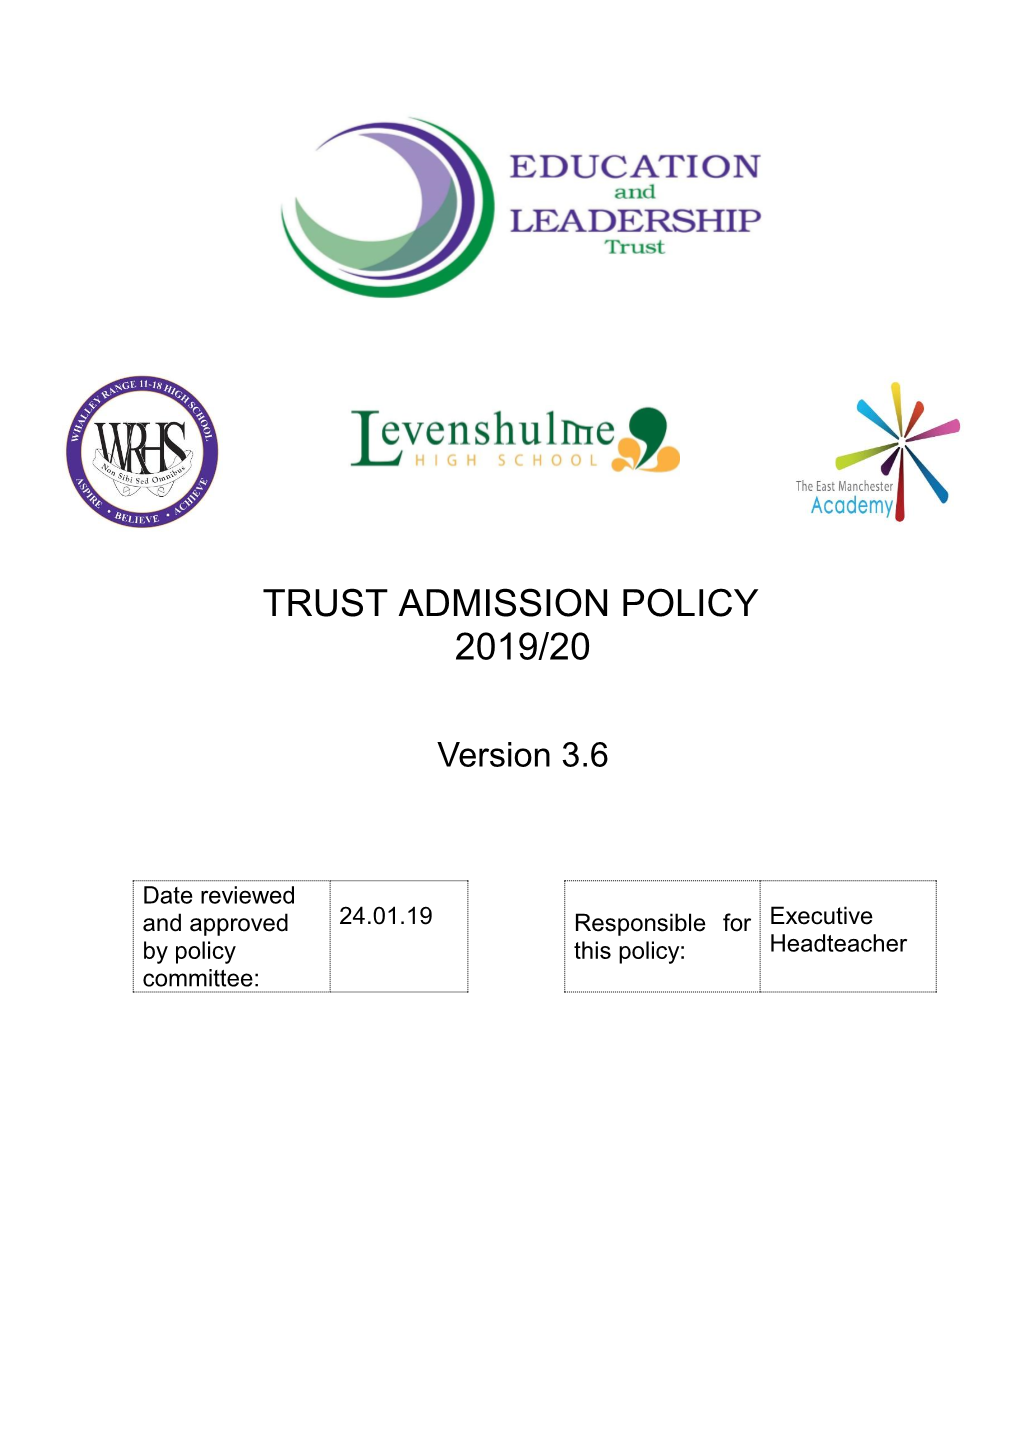 Trust Admission Policy 2019/20